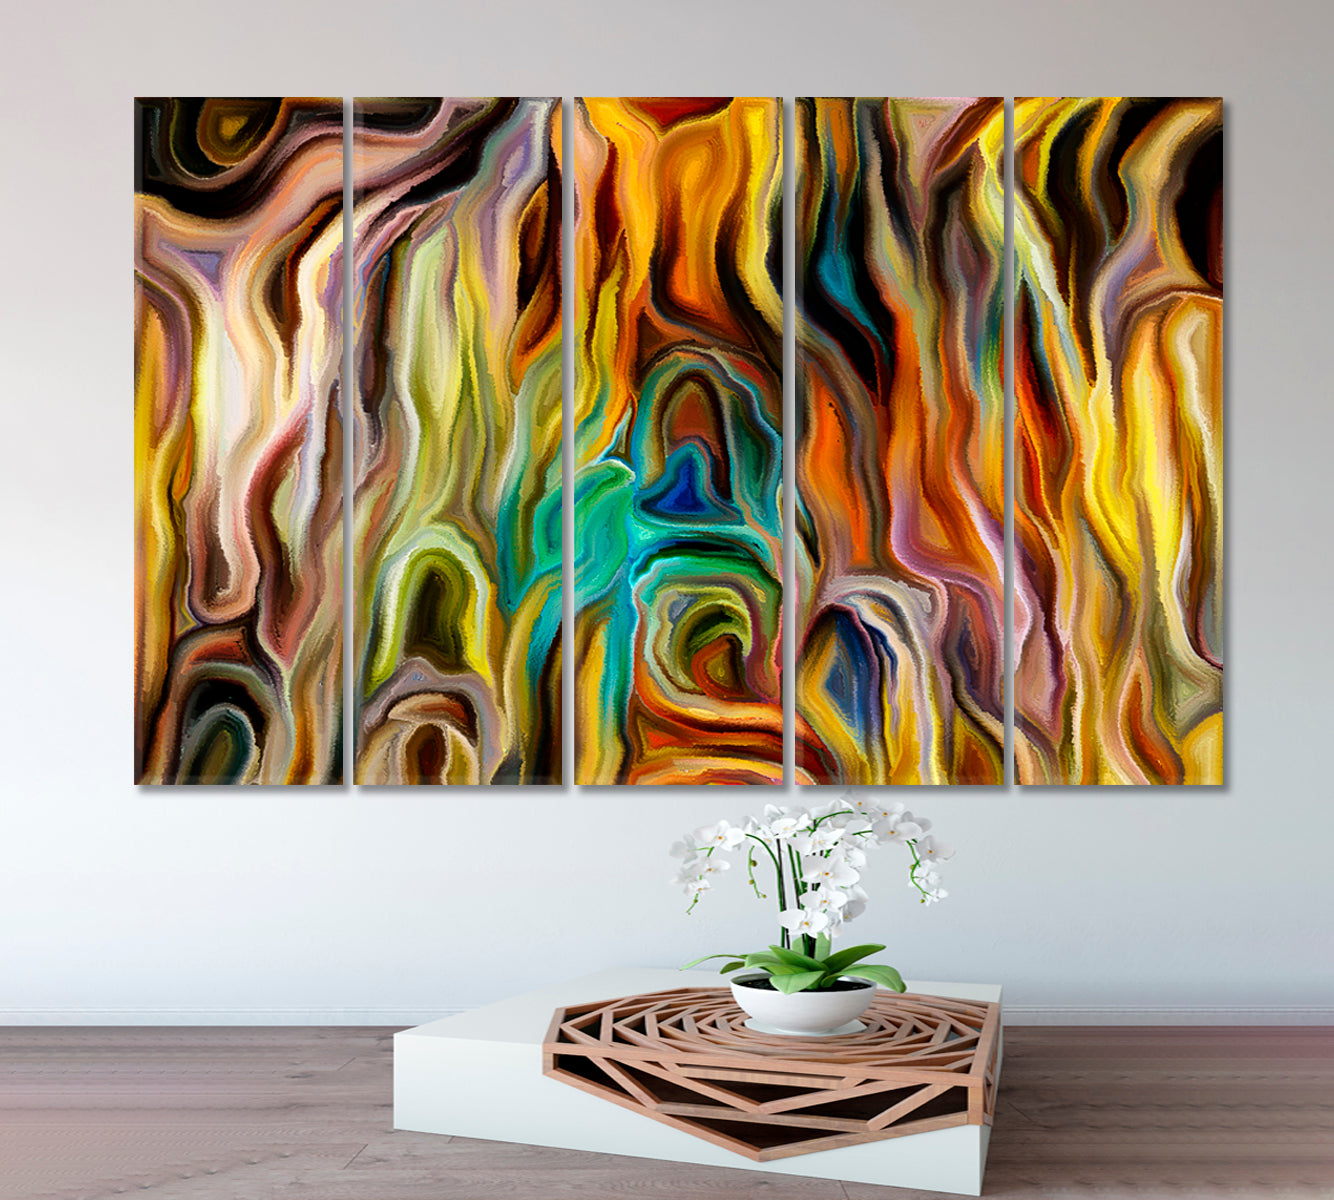 COLORED FLAME LINES Abstract Contemporary Art Contemporary Art Artesty 5 panels 36" x 24" 